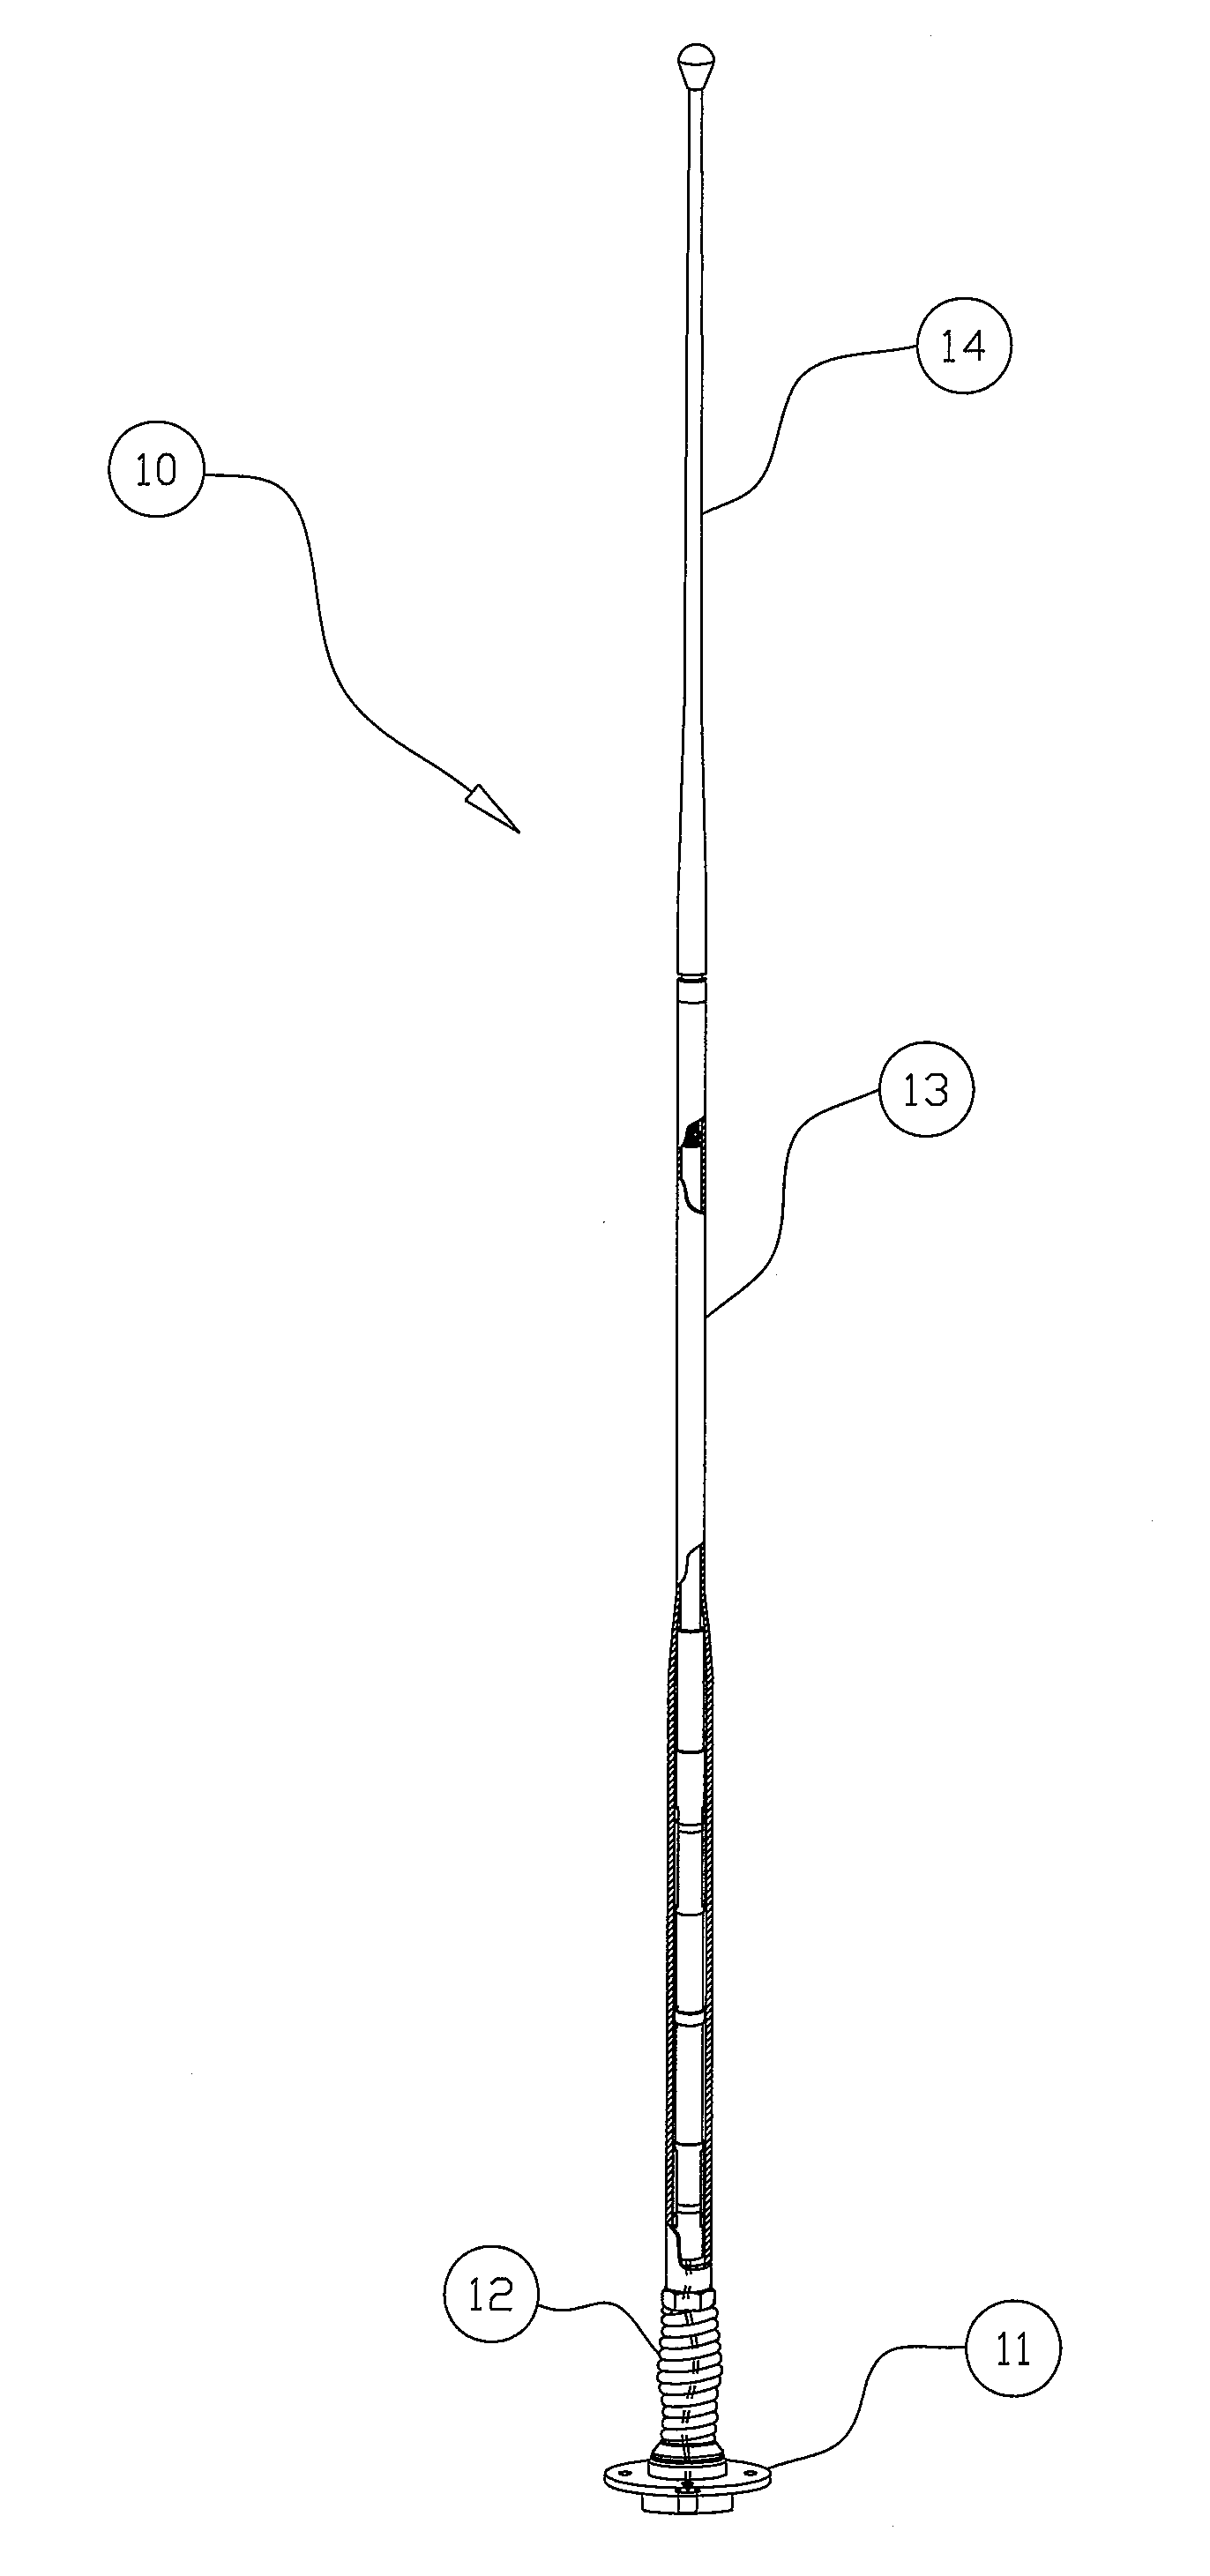 Multiple band collinear dipole antenna